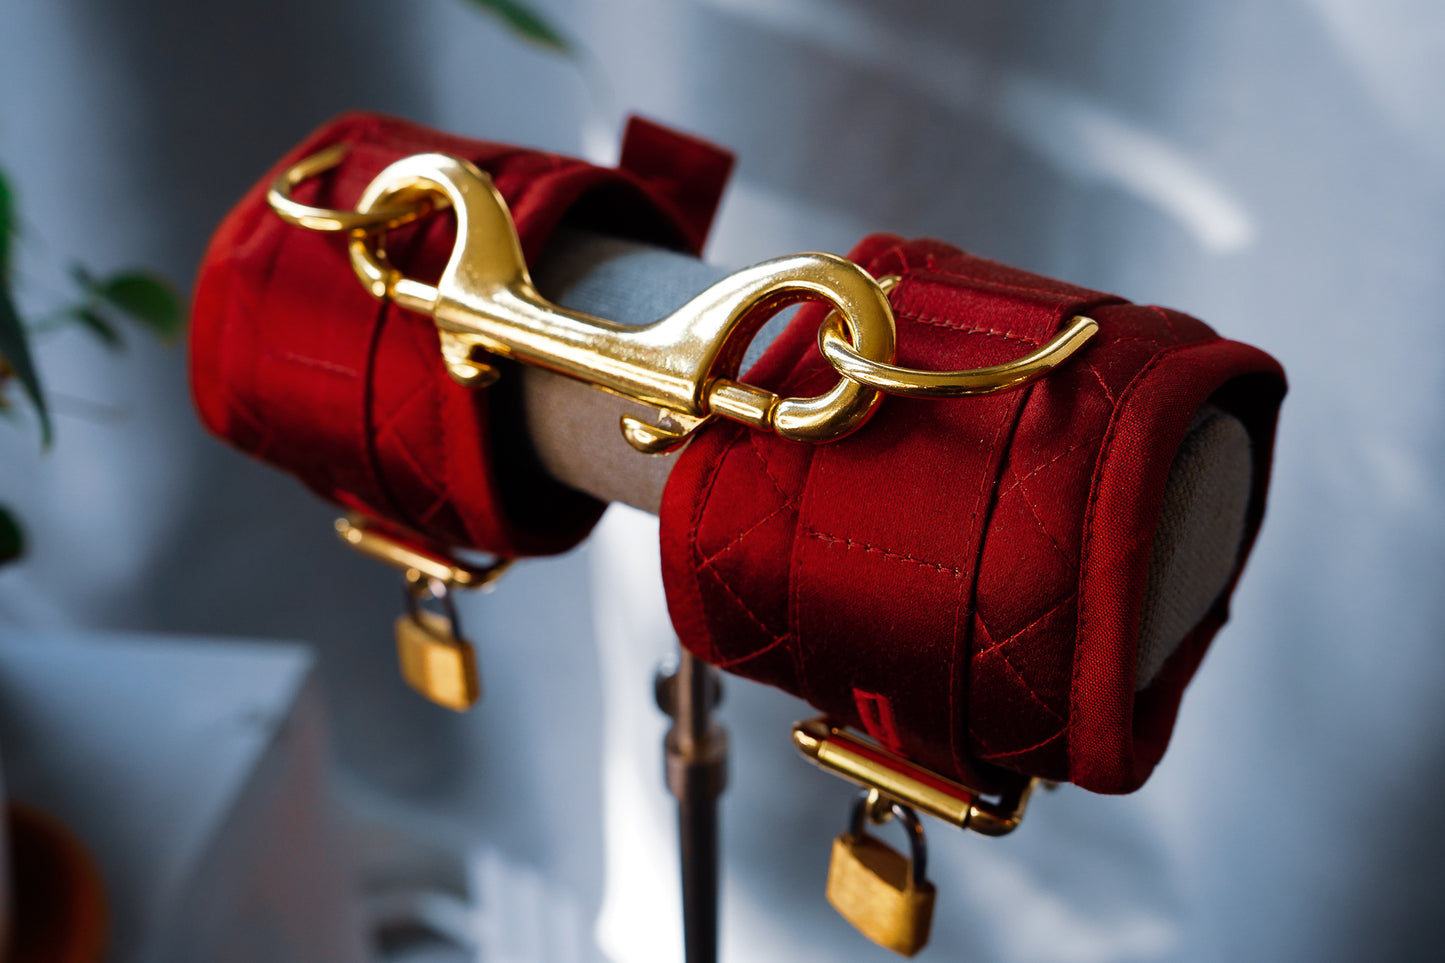 Close up of the Morgan cuffs in red silk satin with gold hardware